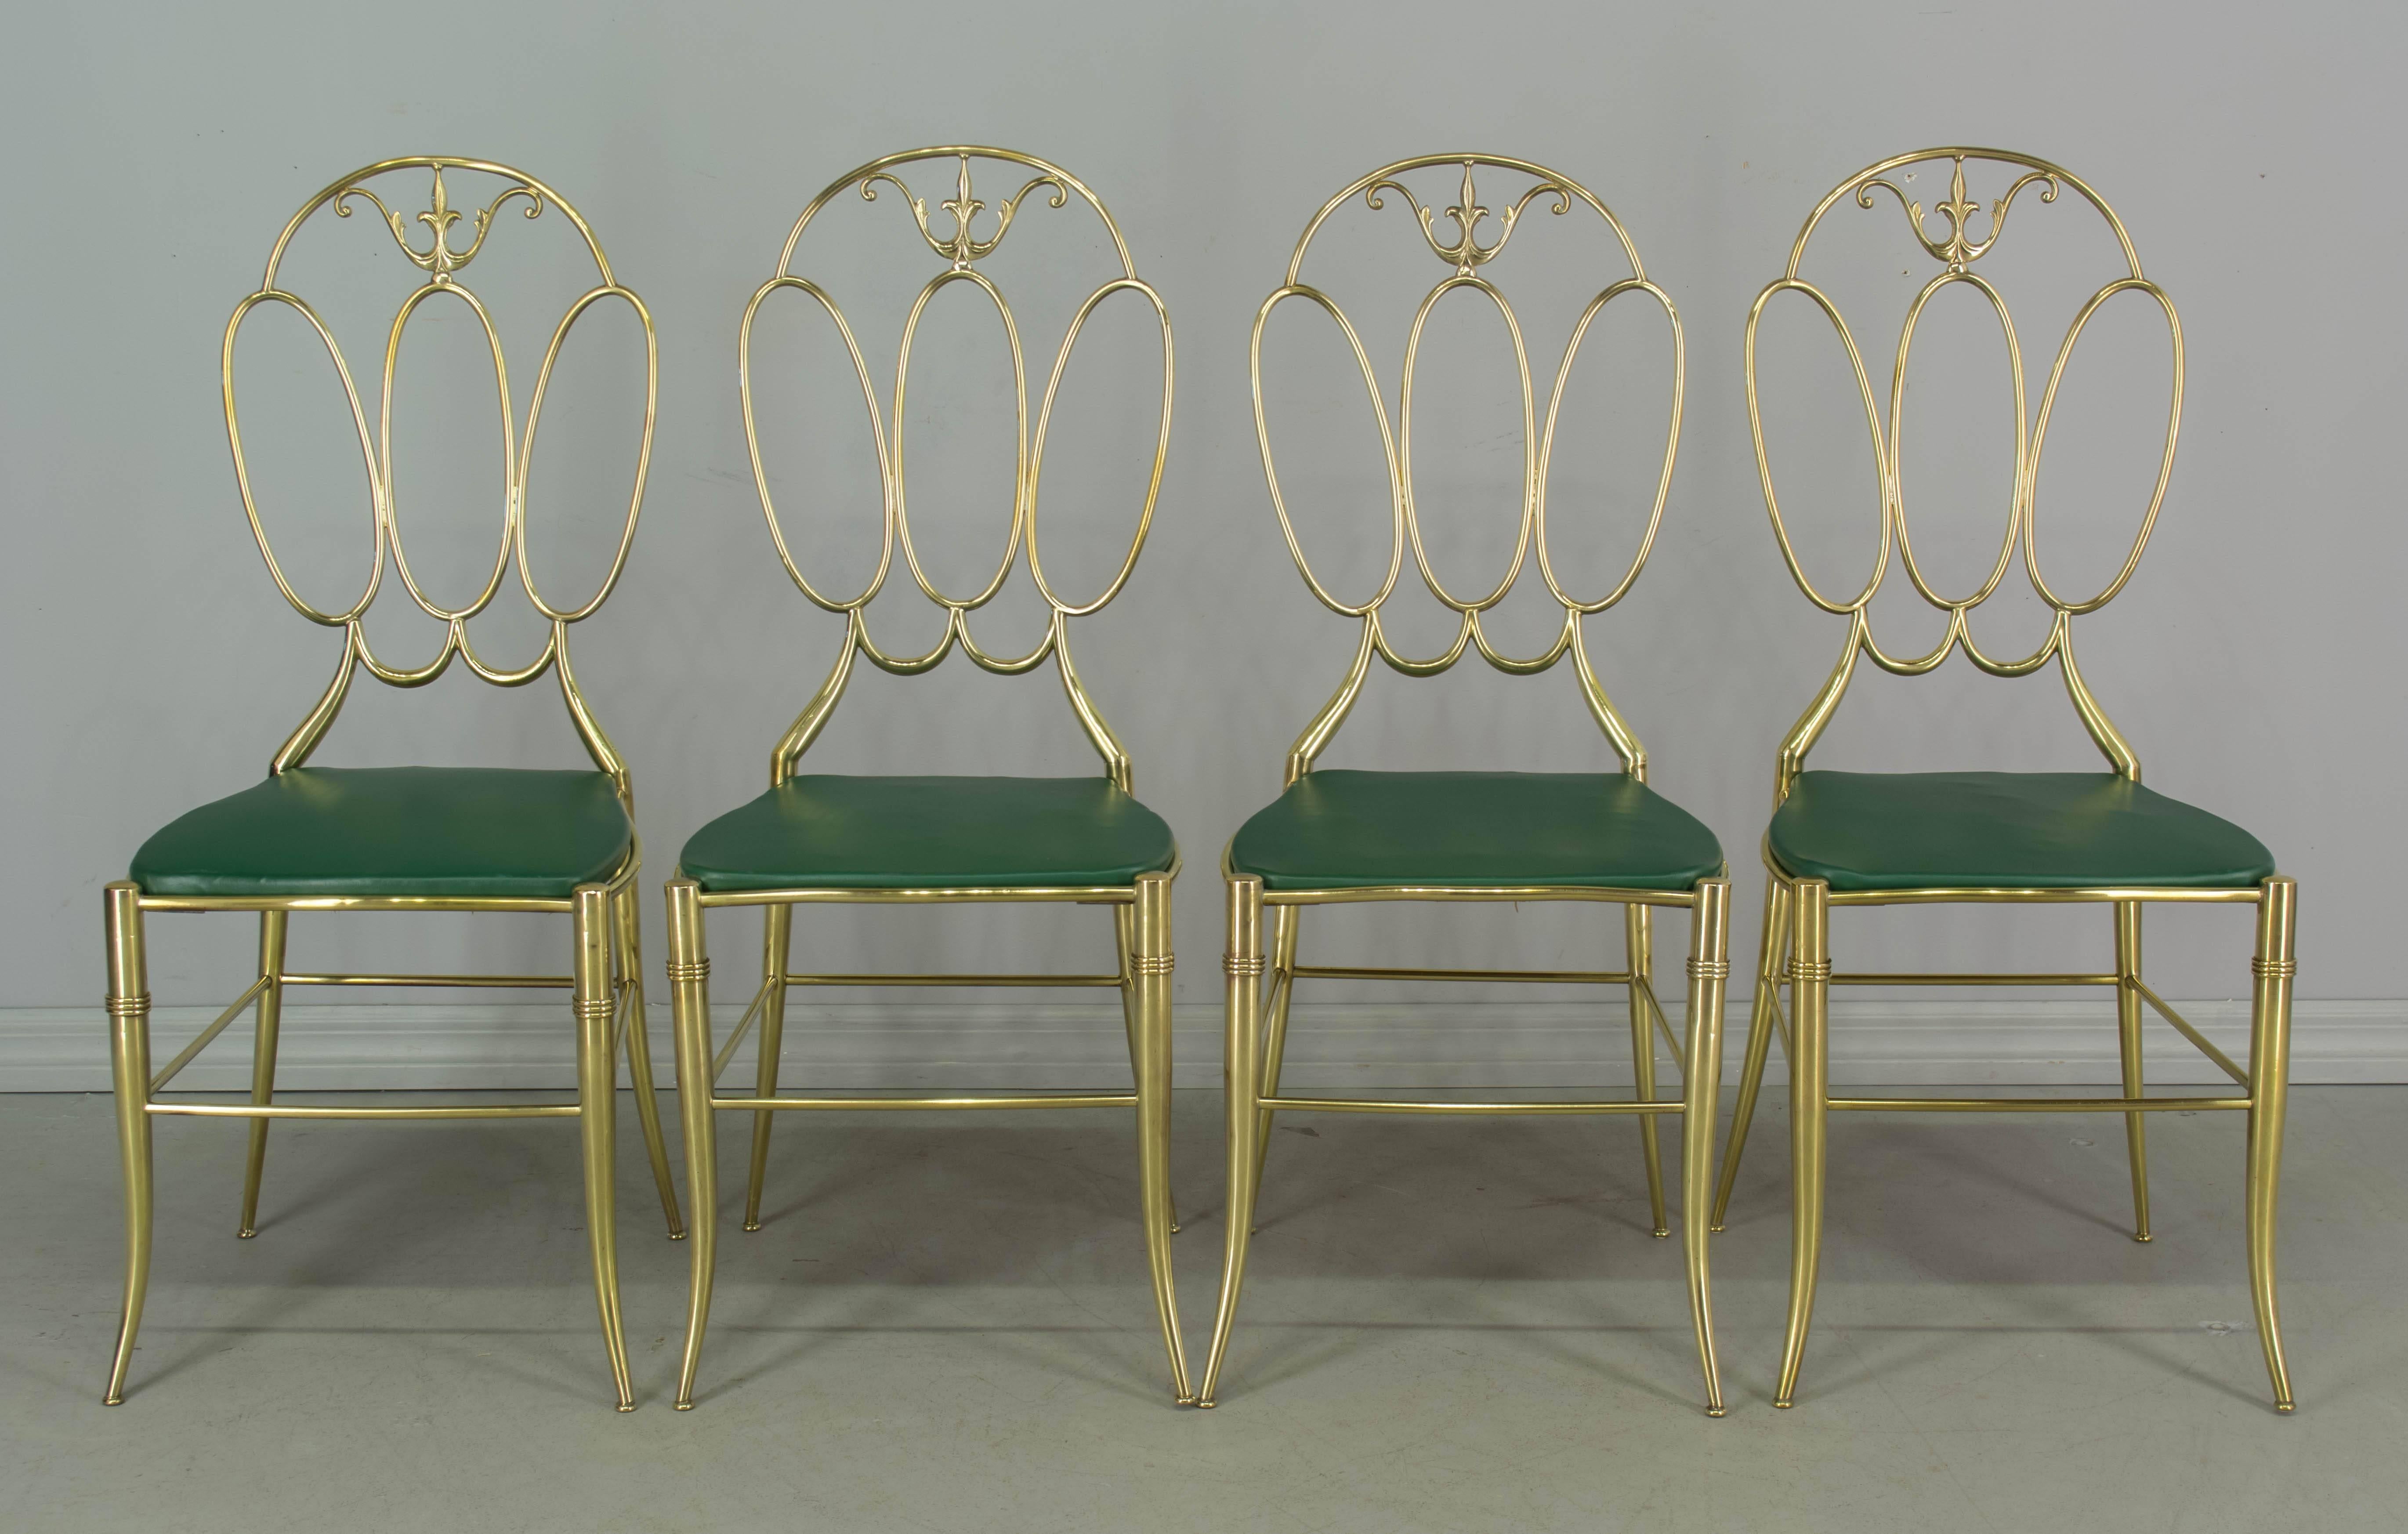 Set of four Italian brass chairs attributed to Chiavari. In excellent condition and very sturdy. Brass has been polished, but not lacquered. Original green vinyl covered seats. Stamped on underside: Made in Italy. 16